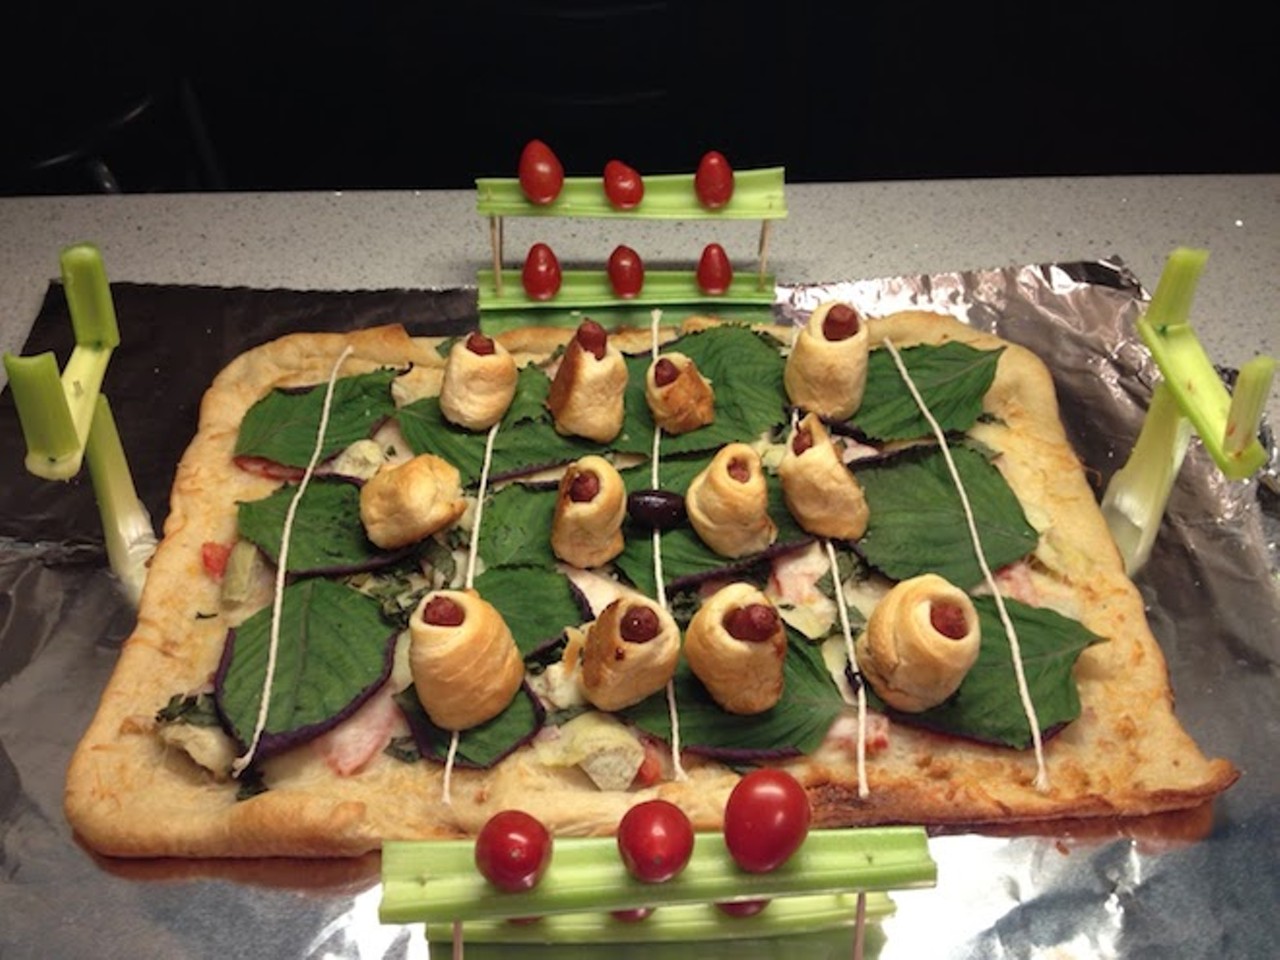 That rare snack stadium in which the field is not built of guacamole.via